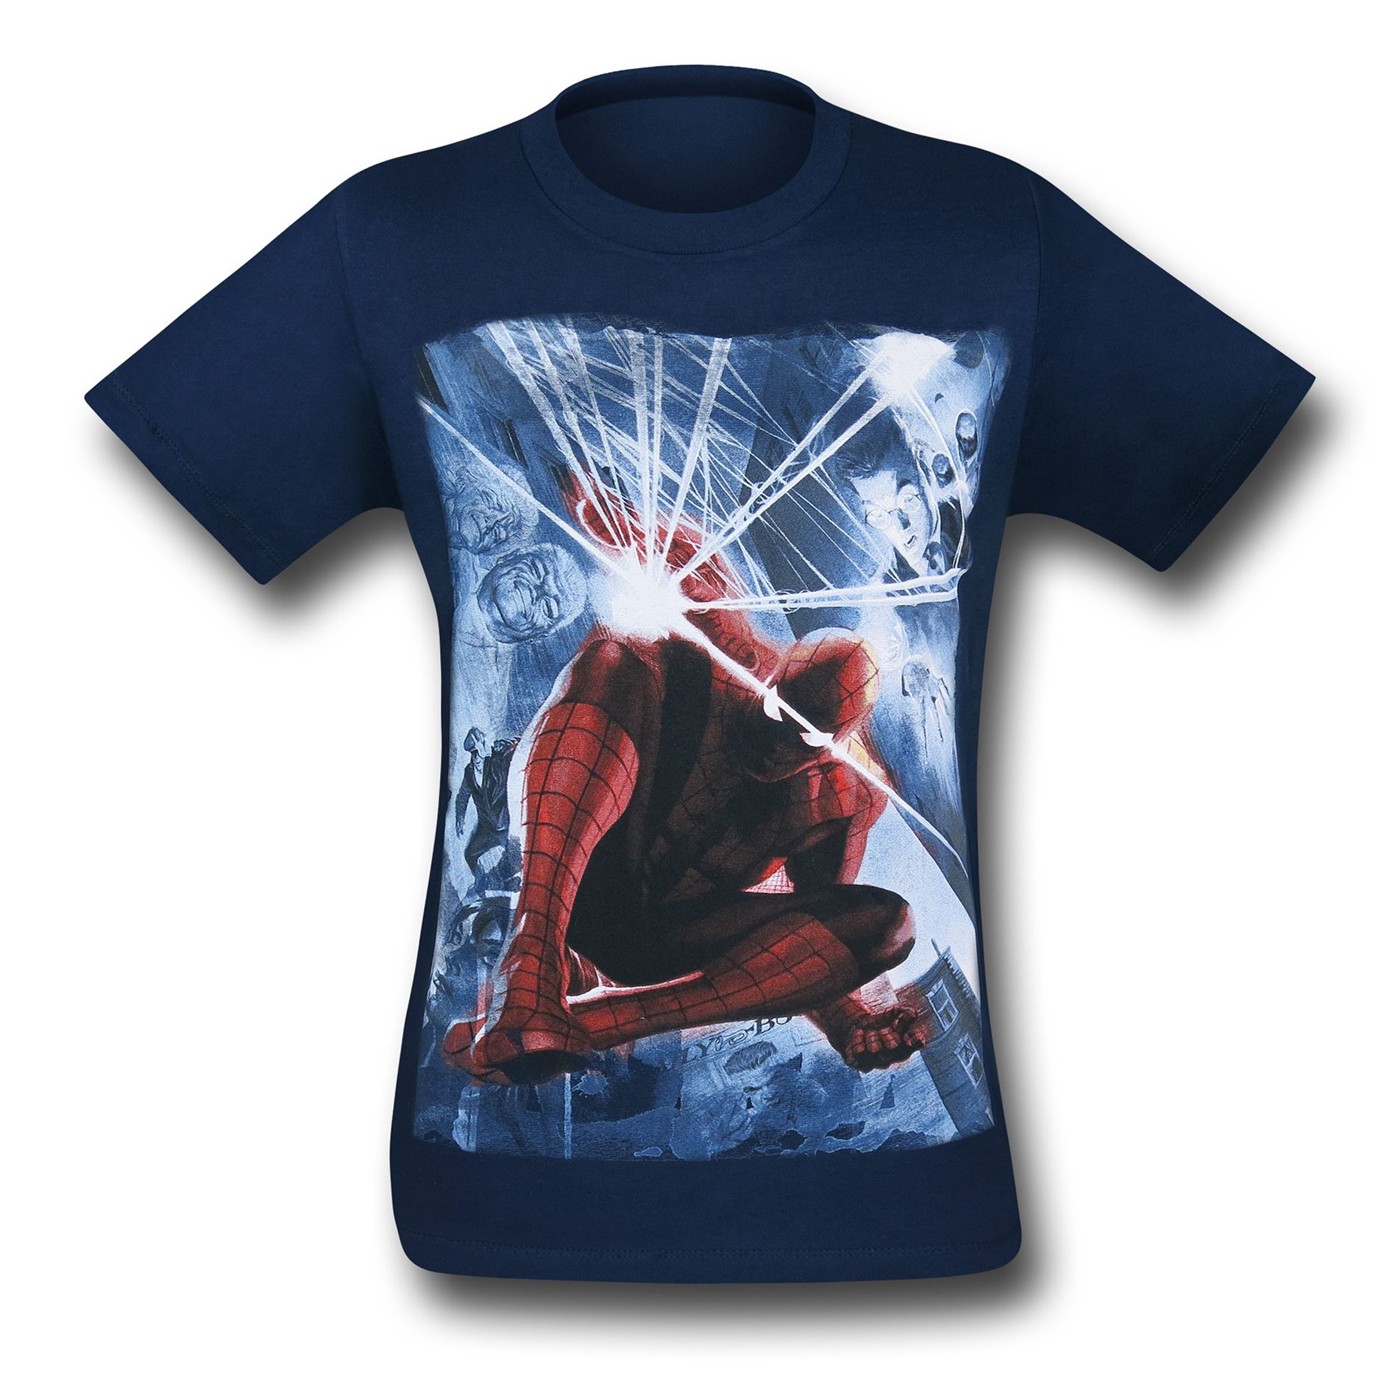 Spiderman 75th Anniversary Limited Edition T-Shirt